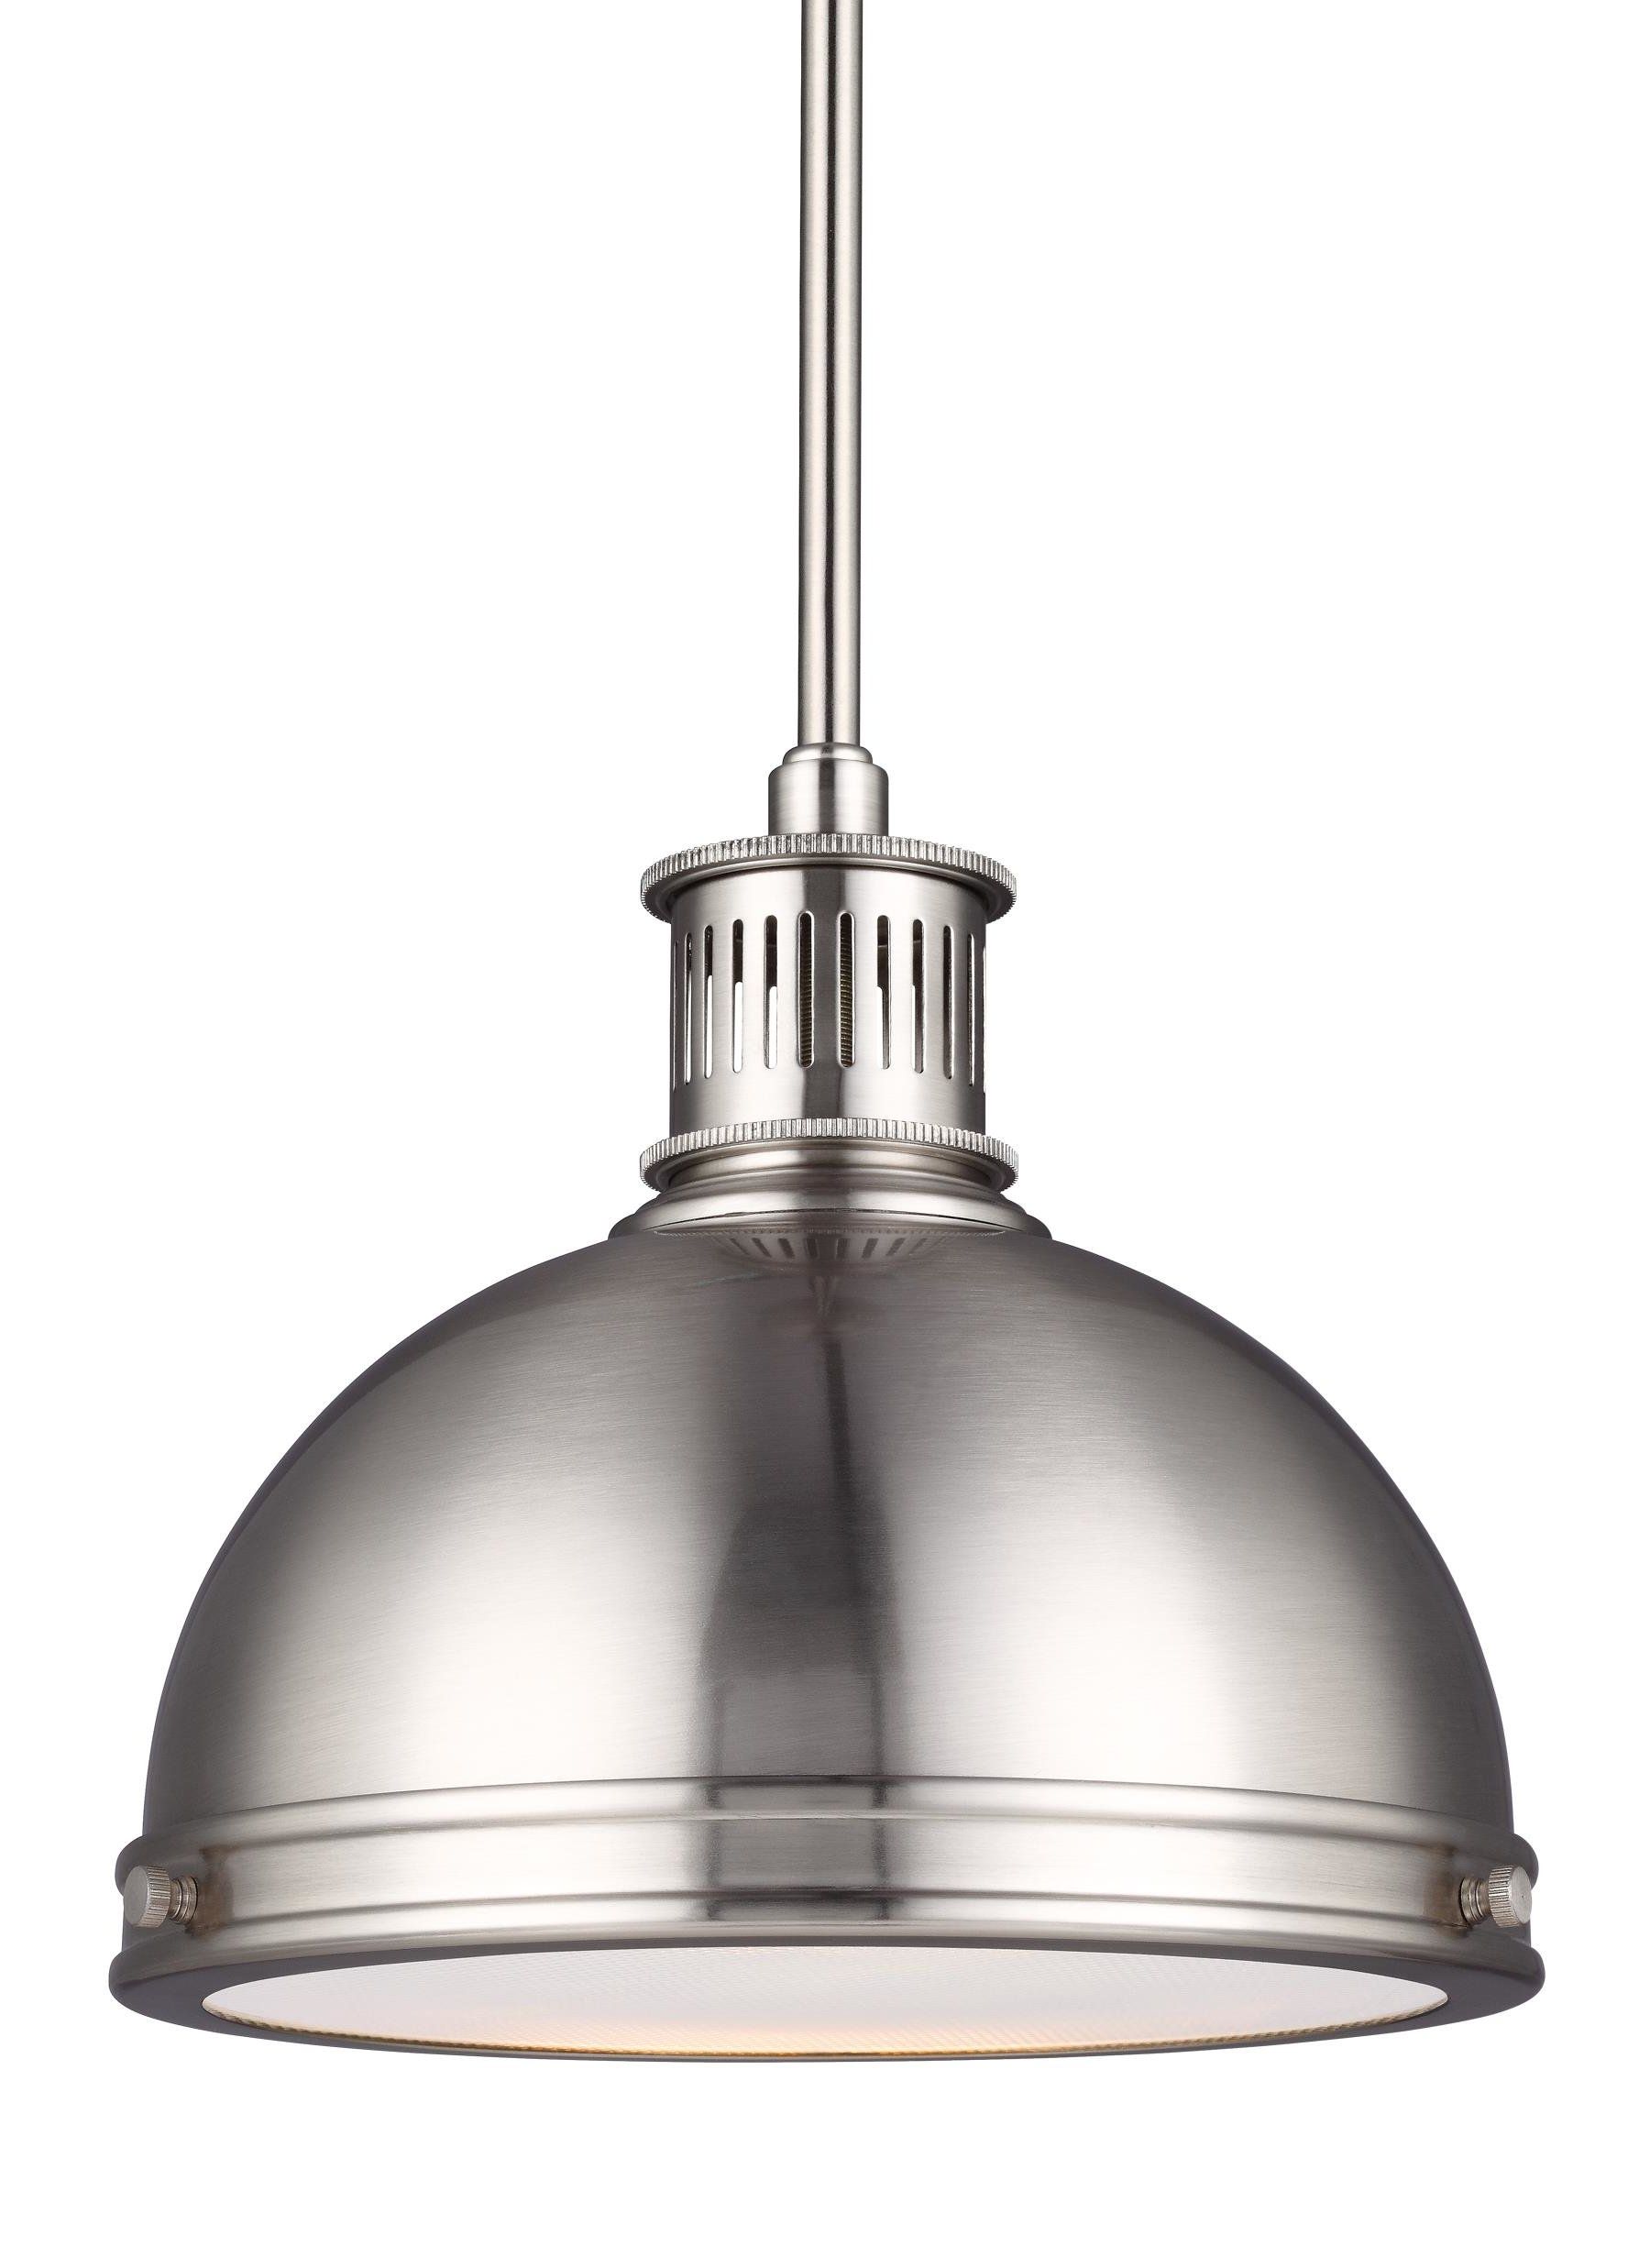 Orchard Hill 1 Light Led Dome Pendant Inside Fashionable Proctor 1 Light Bowl Pendants (View 17 of 20)